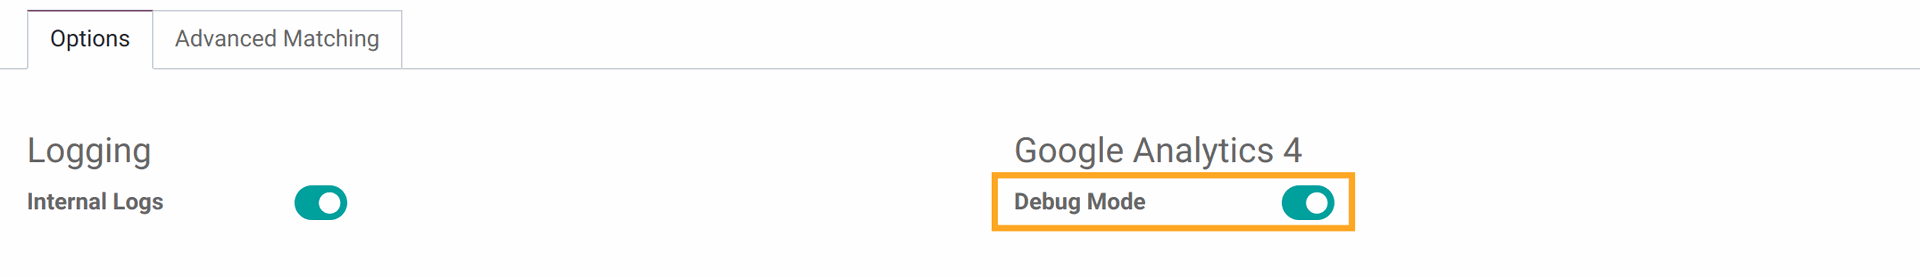 Odoo Google Analytics 4 events tracking - activate the Debug Mode 17.0